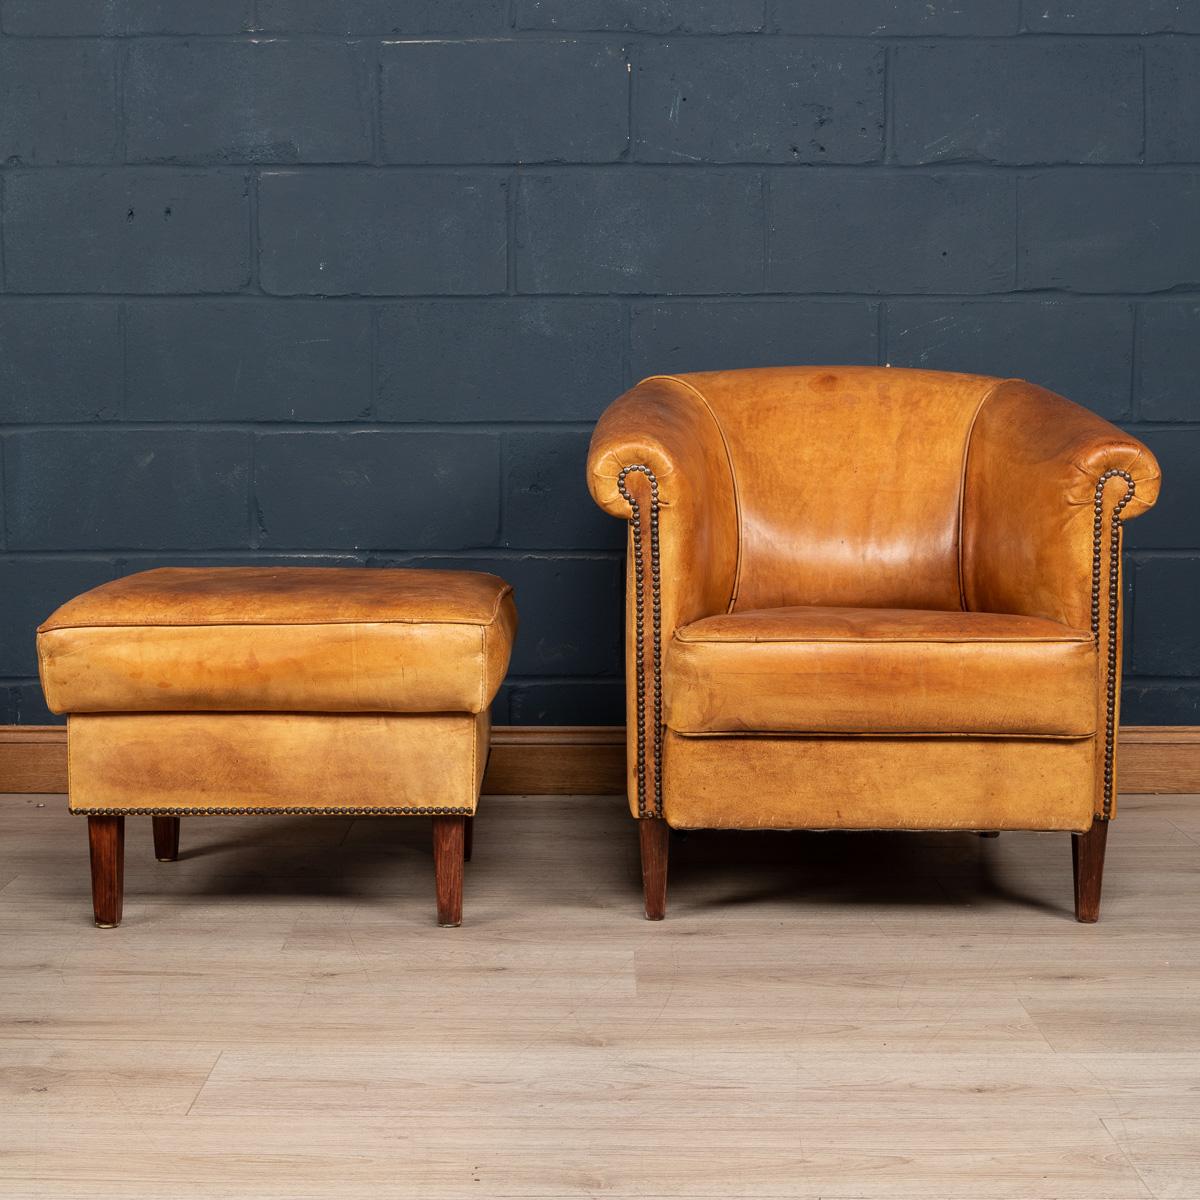 A charming tub chair and matching footstool, hand upholstered sheepskin leather by the finest craftsmen in Holland. The design and craftsmanship of sheep leather furniture was perfected in Holland and spread to other countries in northern